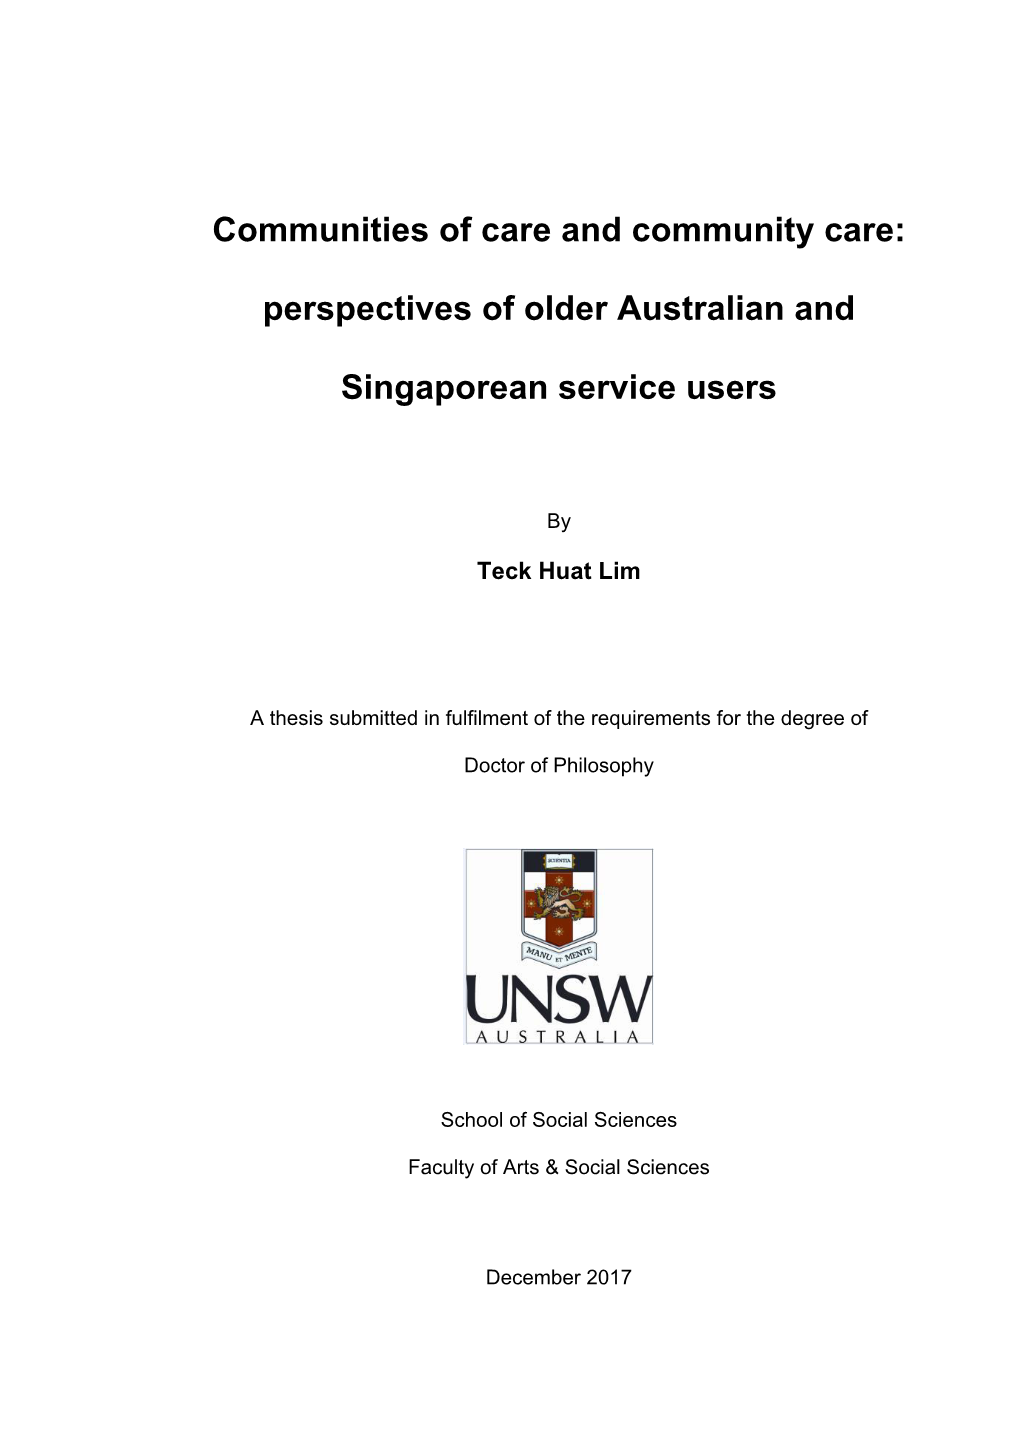 Perspectives of Older Australian and Singaporean Service Users